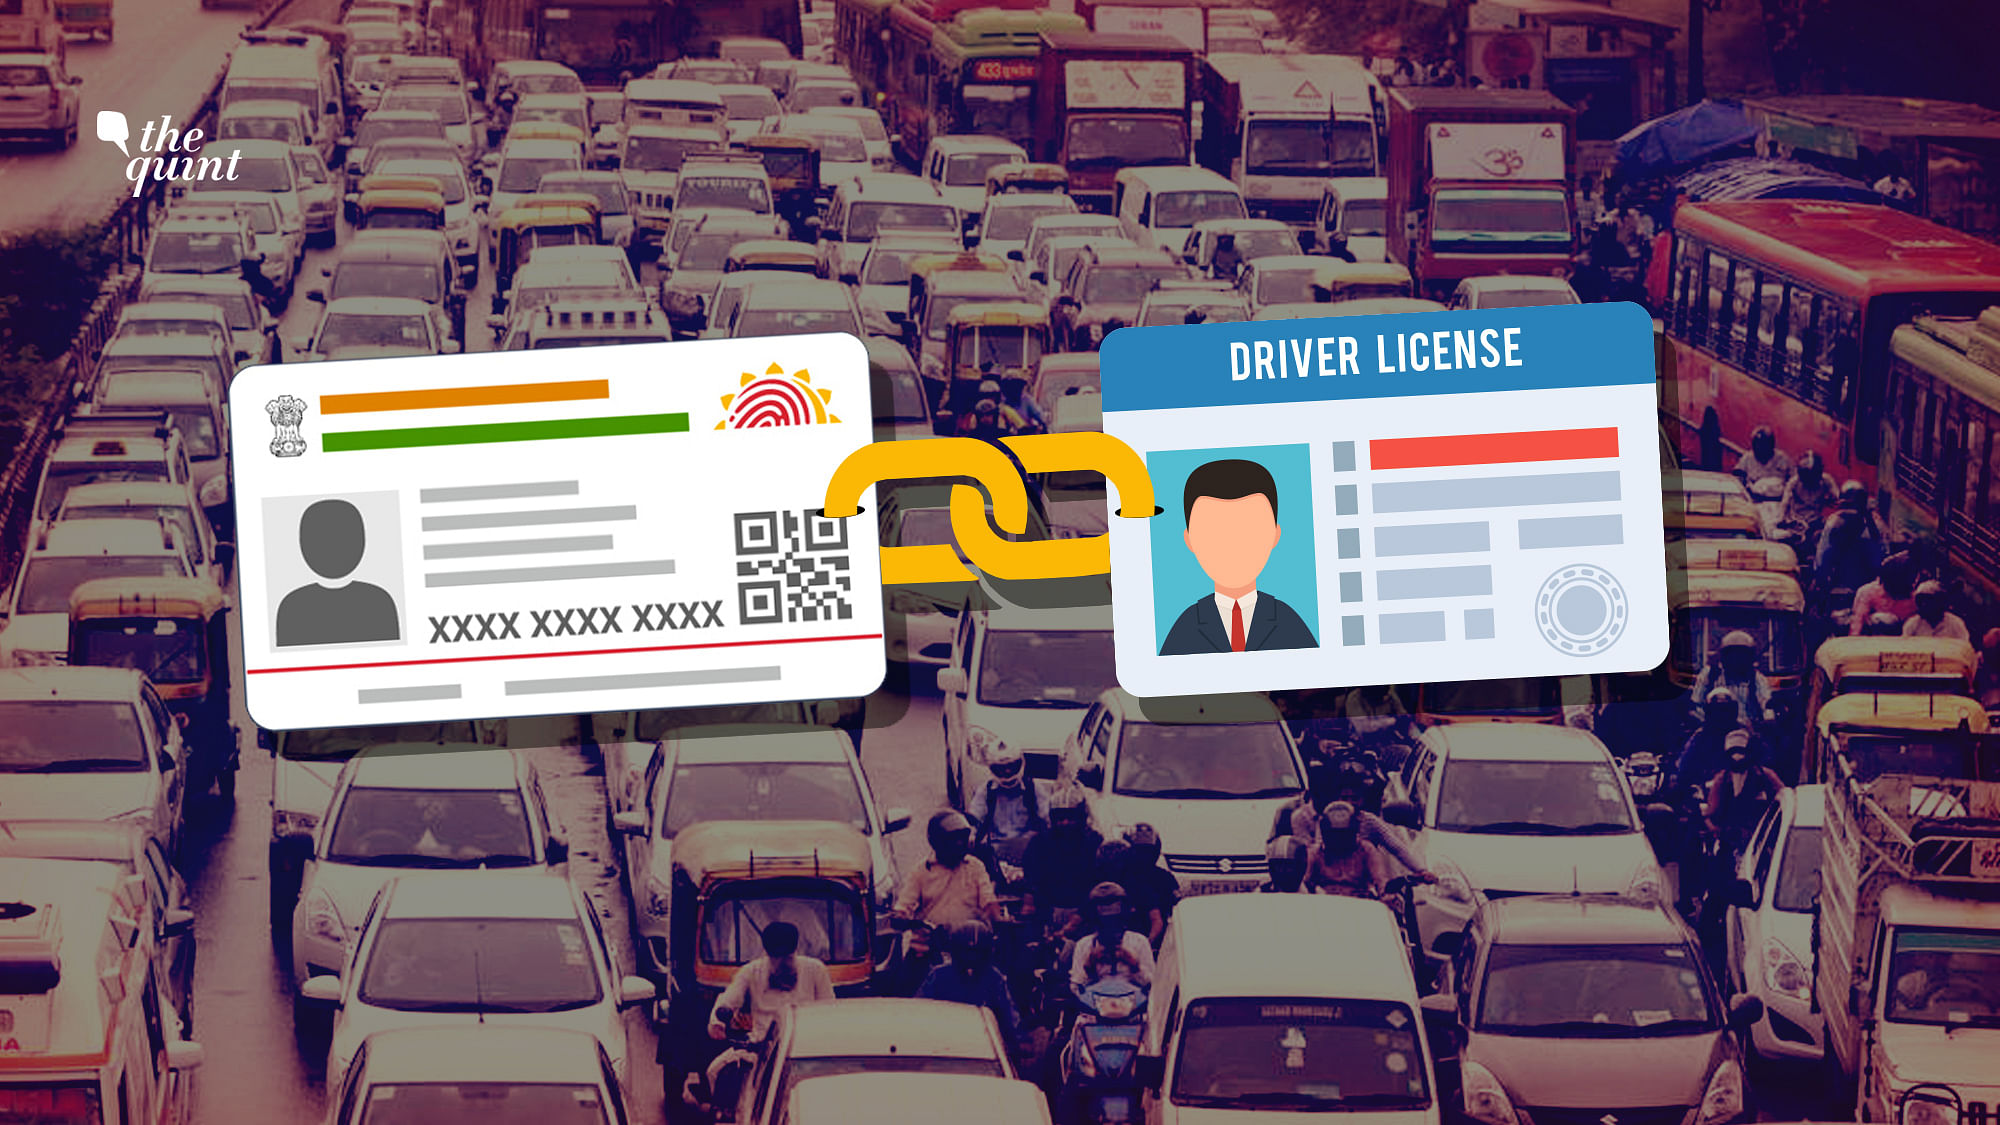 A press release on the Motor Vehicles (Amendment) Bill, 2019, passed by Rajya Sabha on 31 July erroneously mentioned that Aadhaar had been made mandatory by the Ministry of Road Transport &amp; Highways.